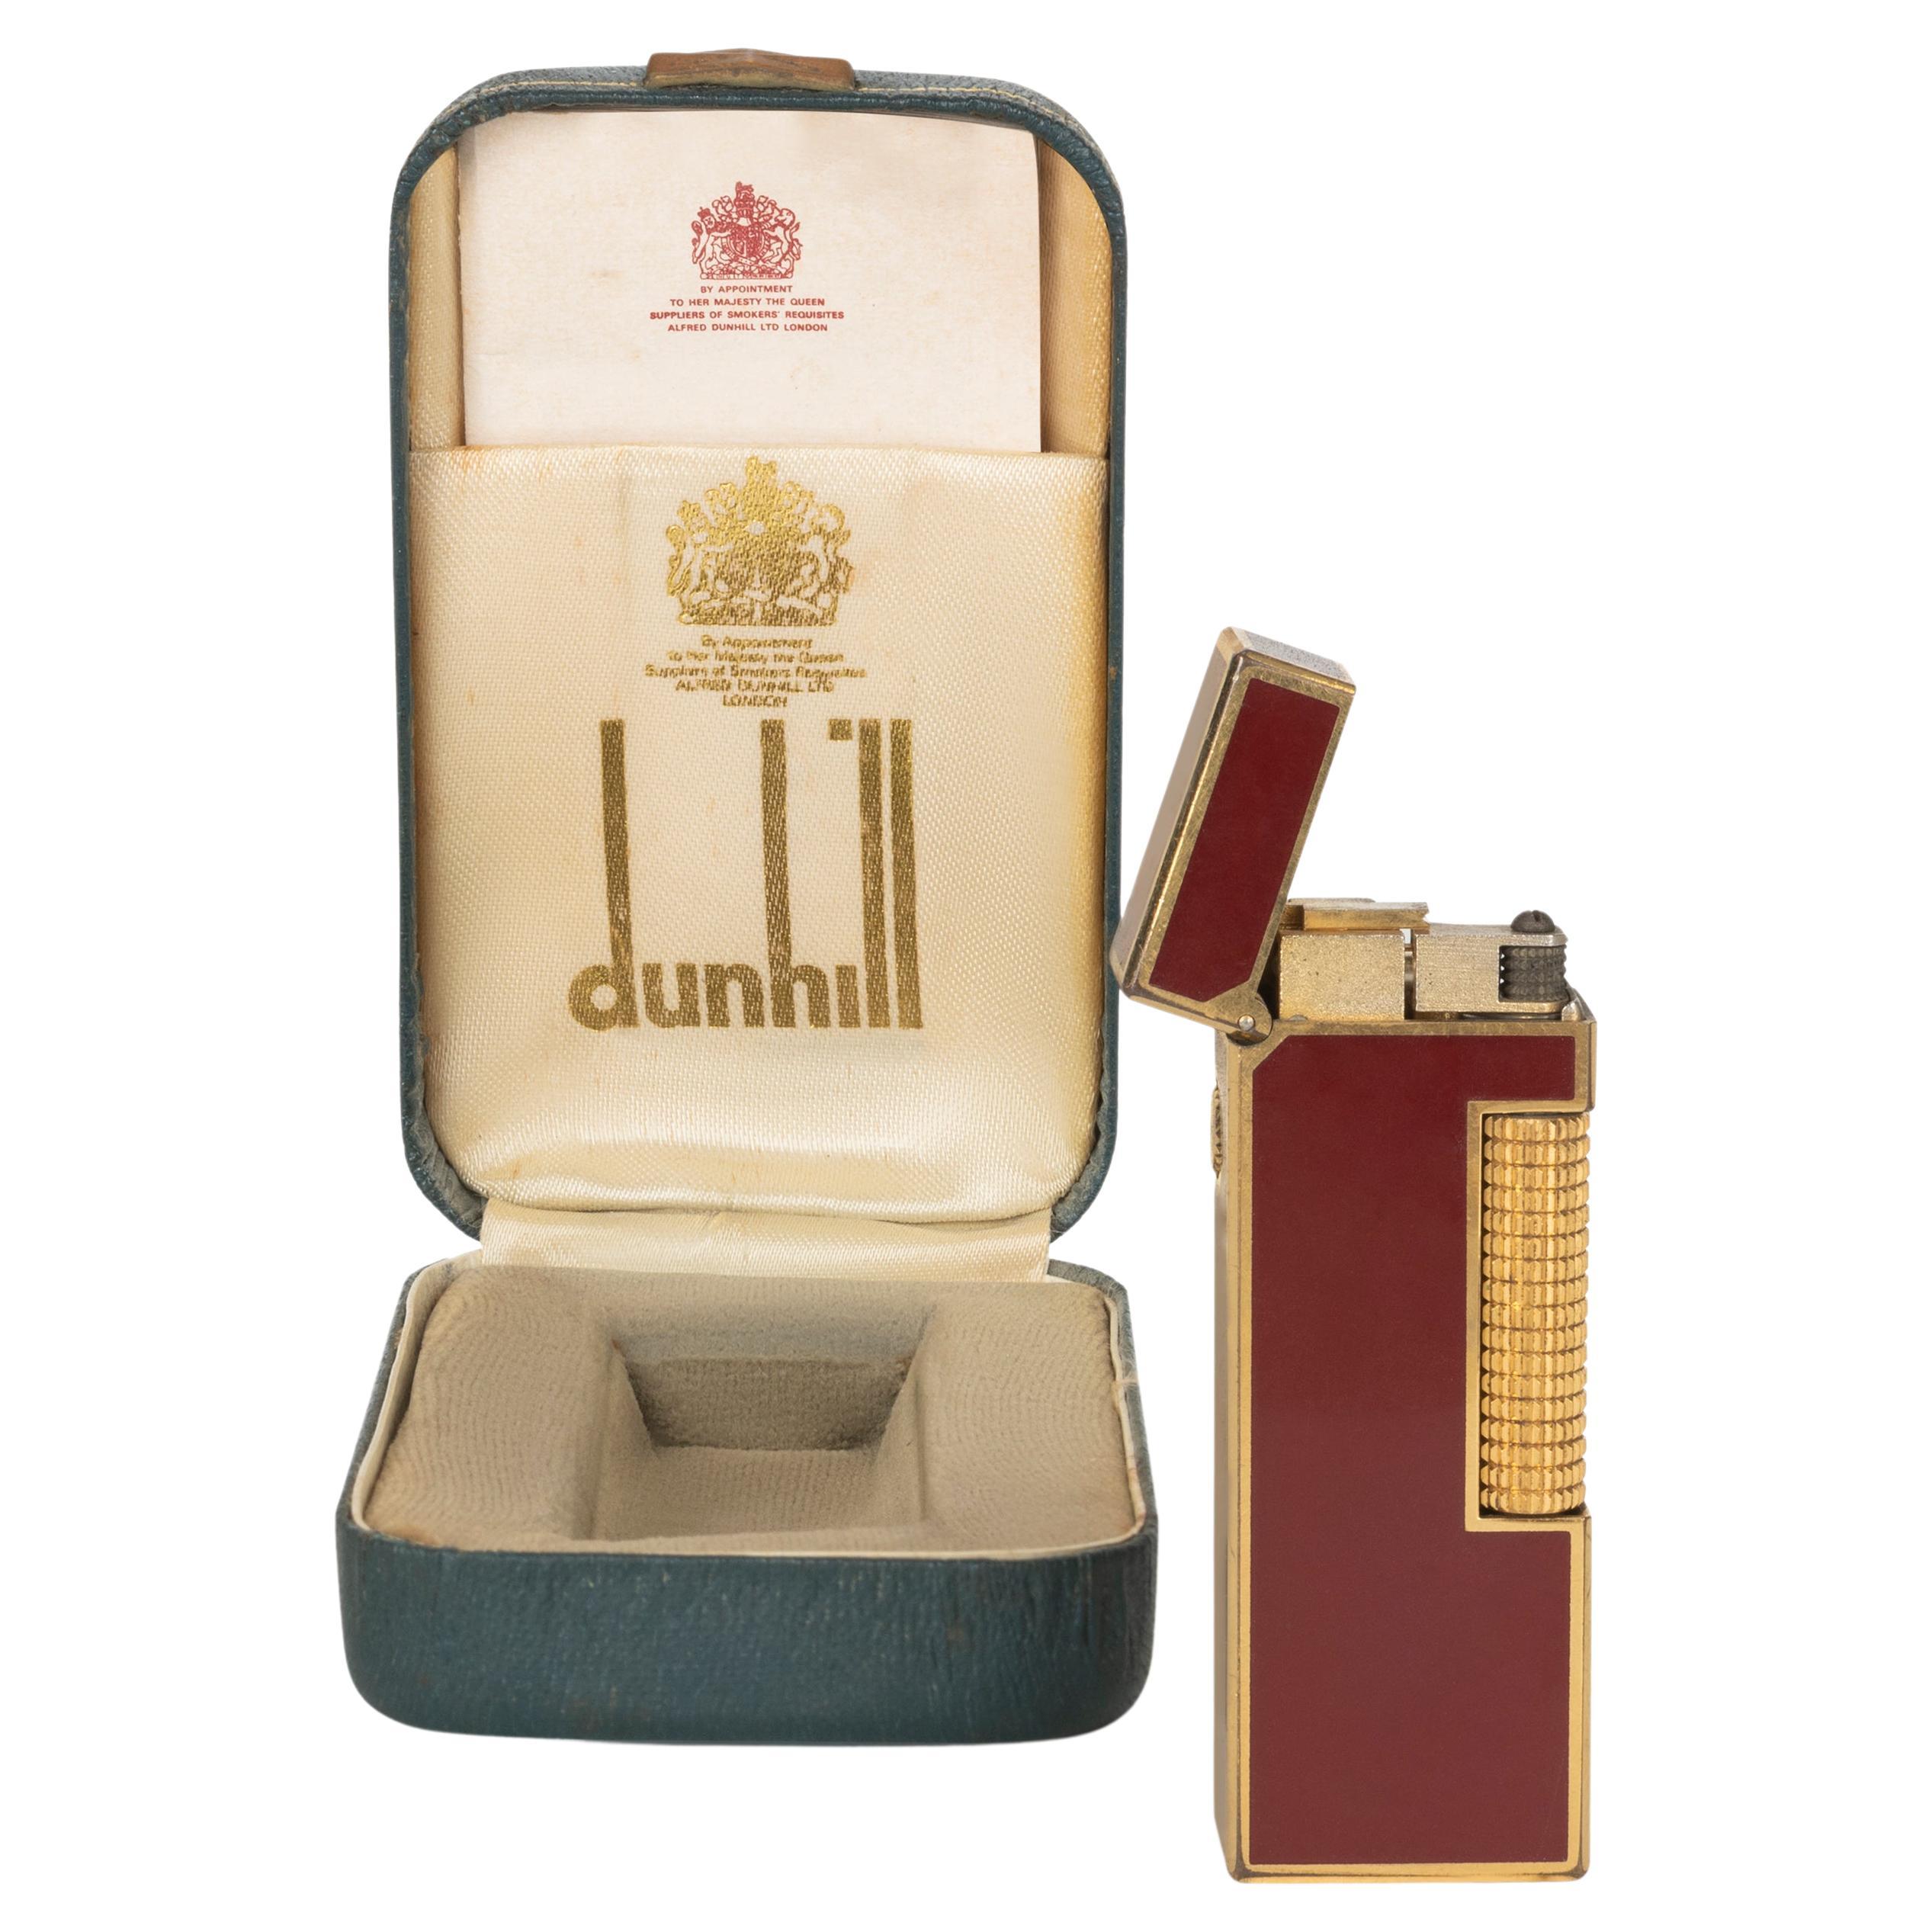 Circa 80s Iconic Rare Vintage Dunhill Gold-Plated & Red Lacquer Swiss, Lighter For Sale